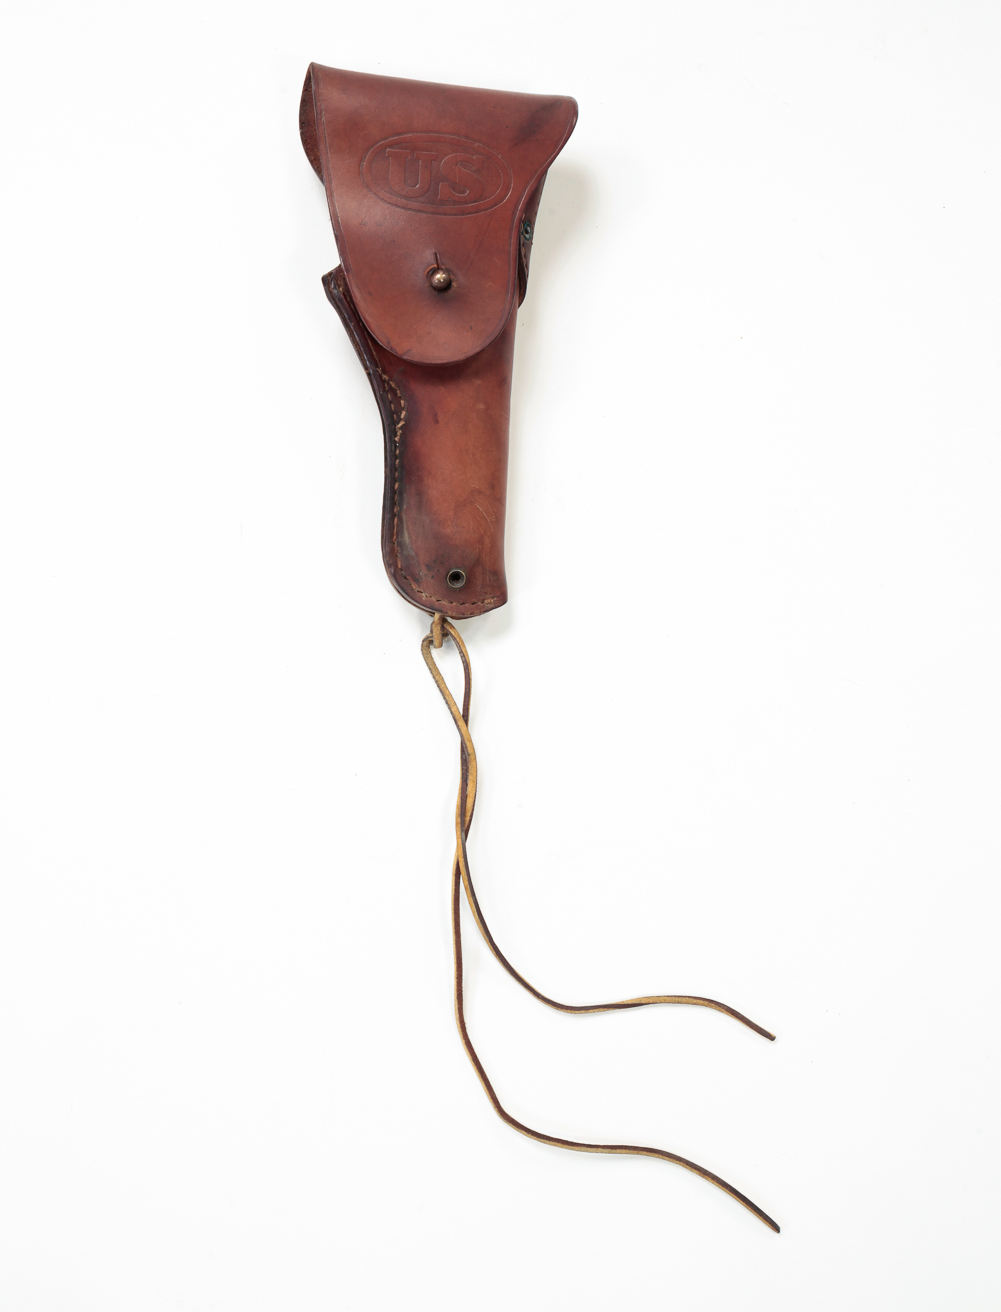 1944 US LEATHER HOLSTER Leather 31a7b3